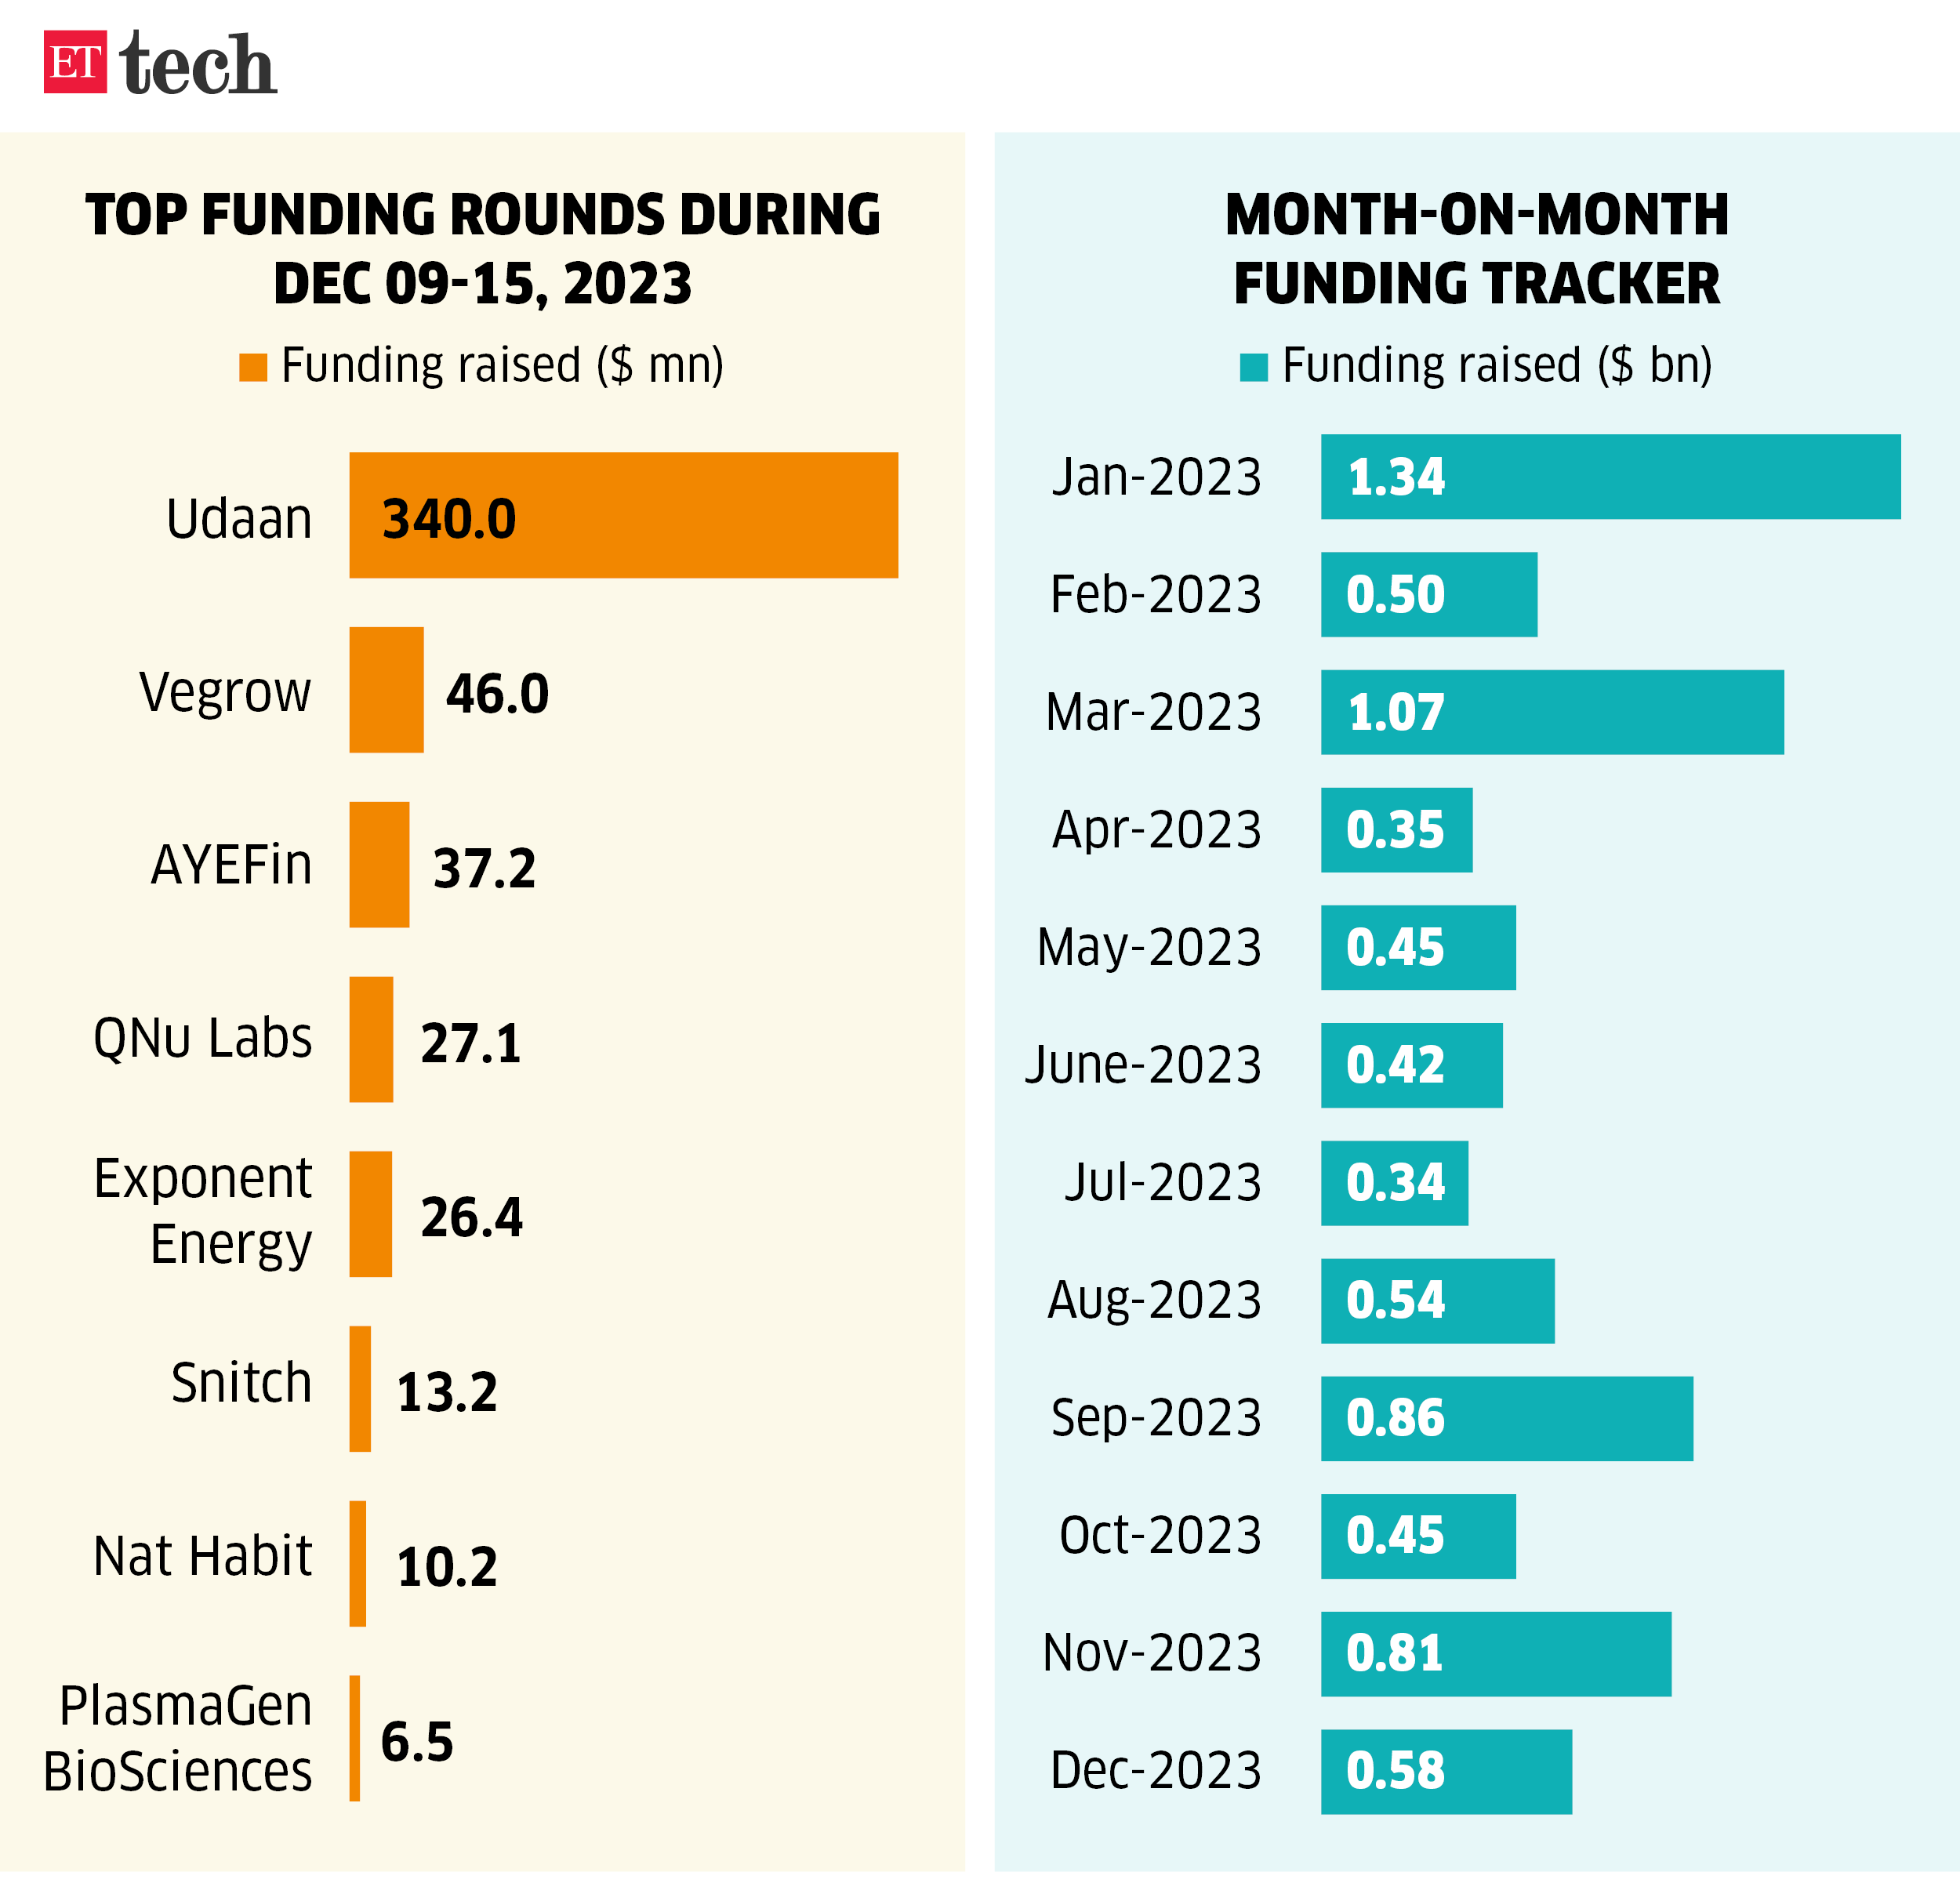 Top funding rounds during